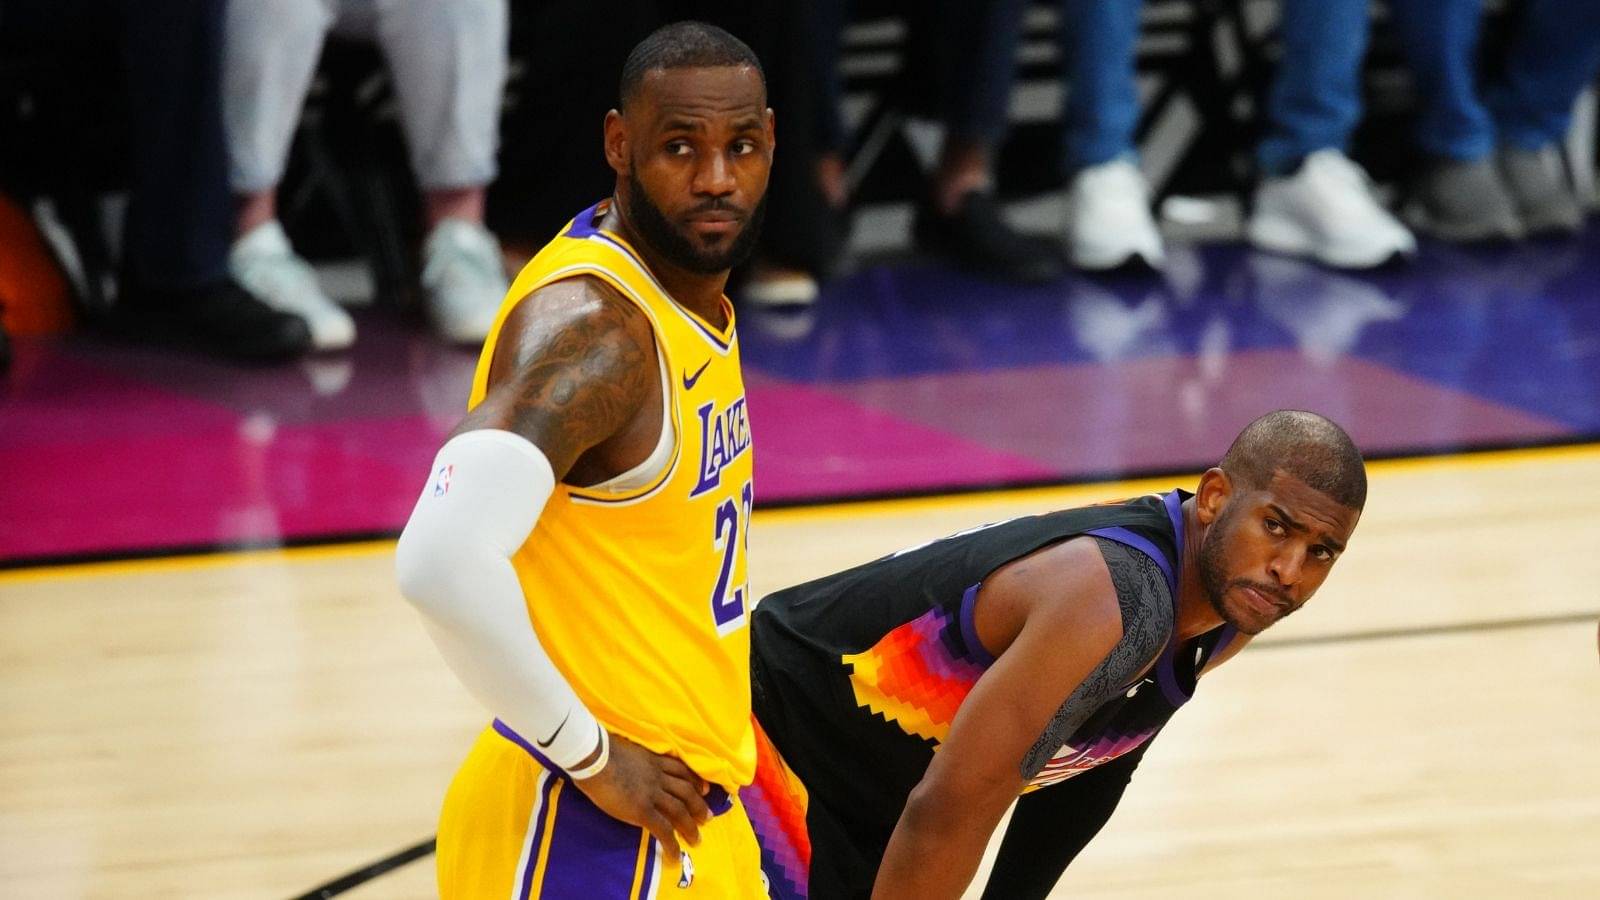 "I don’t know why Lakers were guarding me?! I could not dribble or shoot, I was faking the funk”: Chris Paul expresses his wonder in LeBron James and Frank Vogel's decision to waste a defender on him